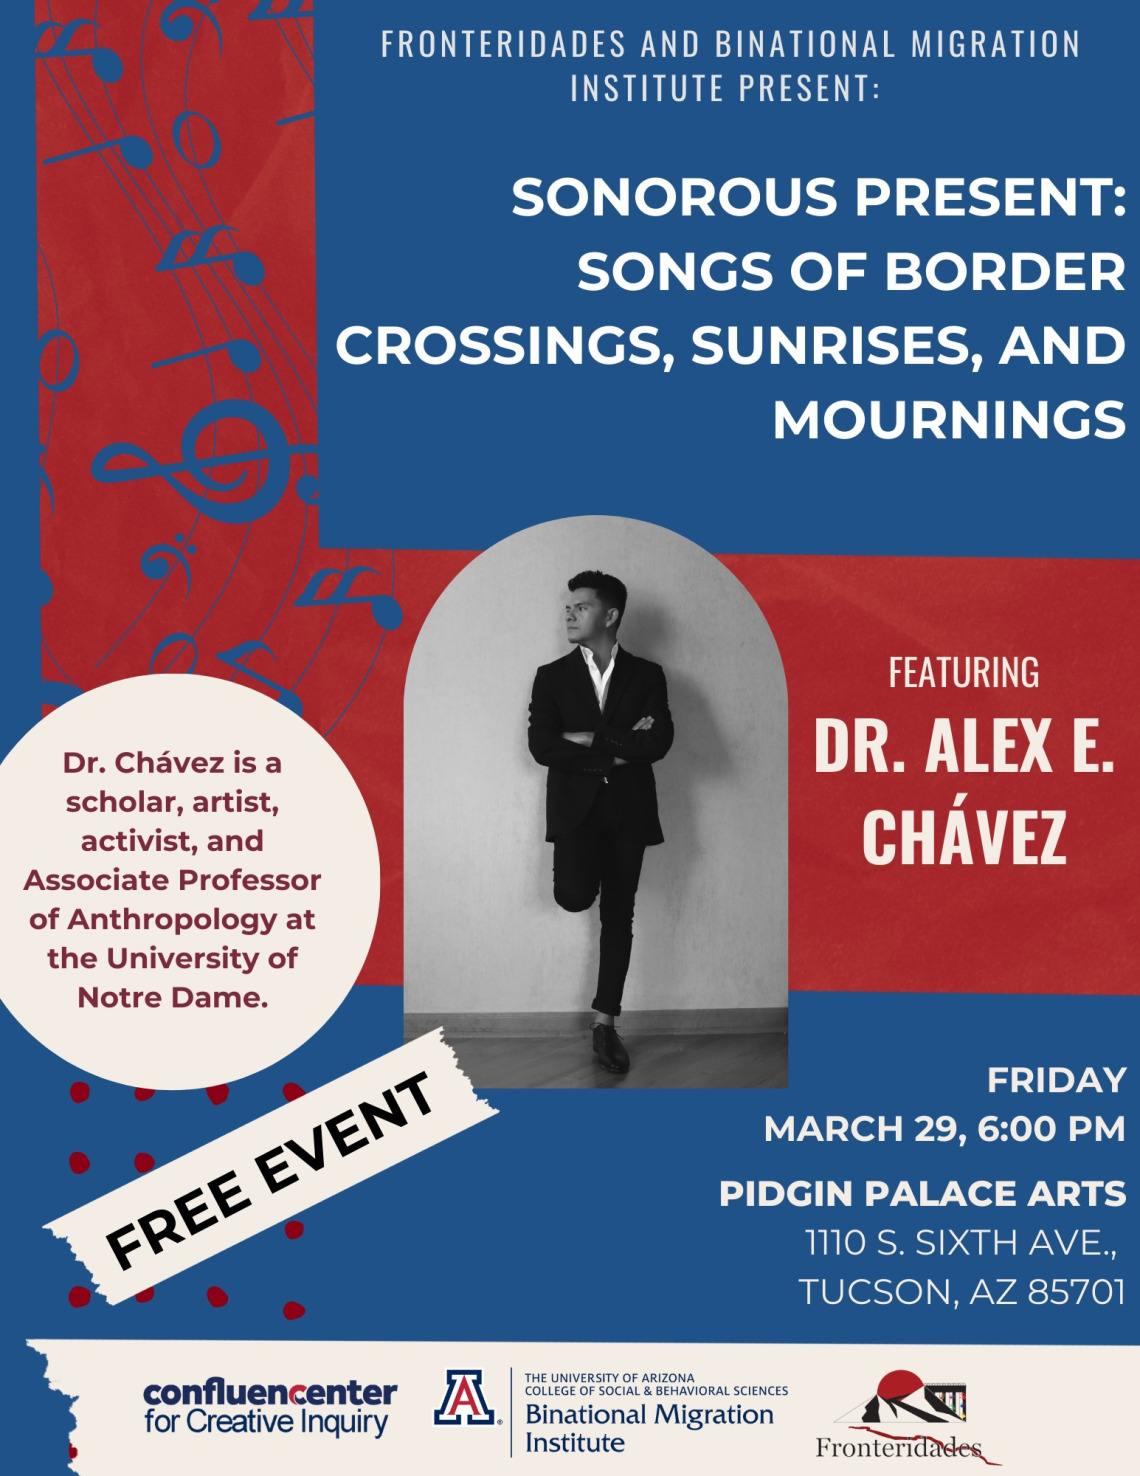 Flyer for musical performance by Alex Chavez